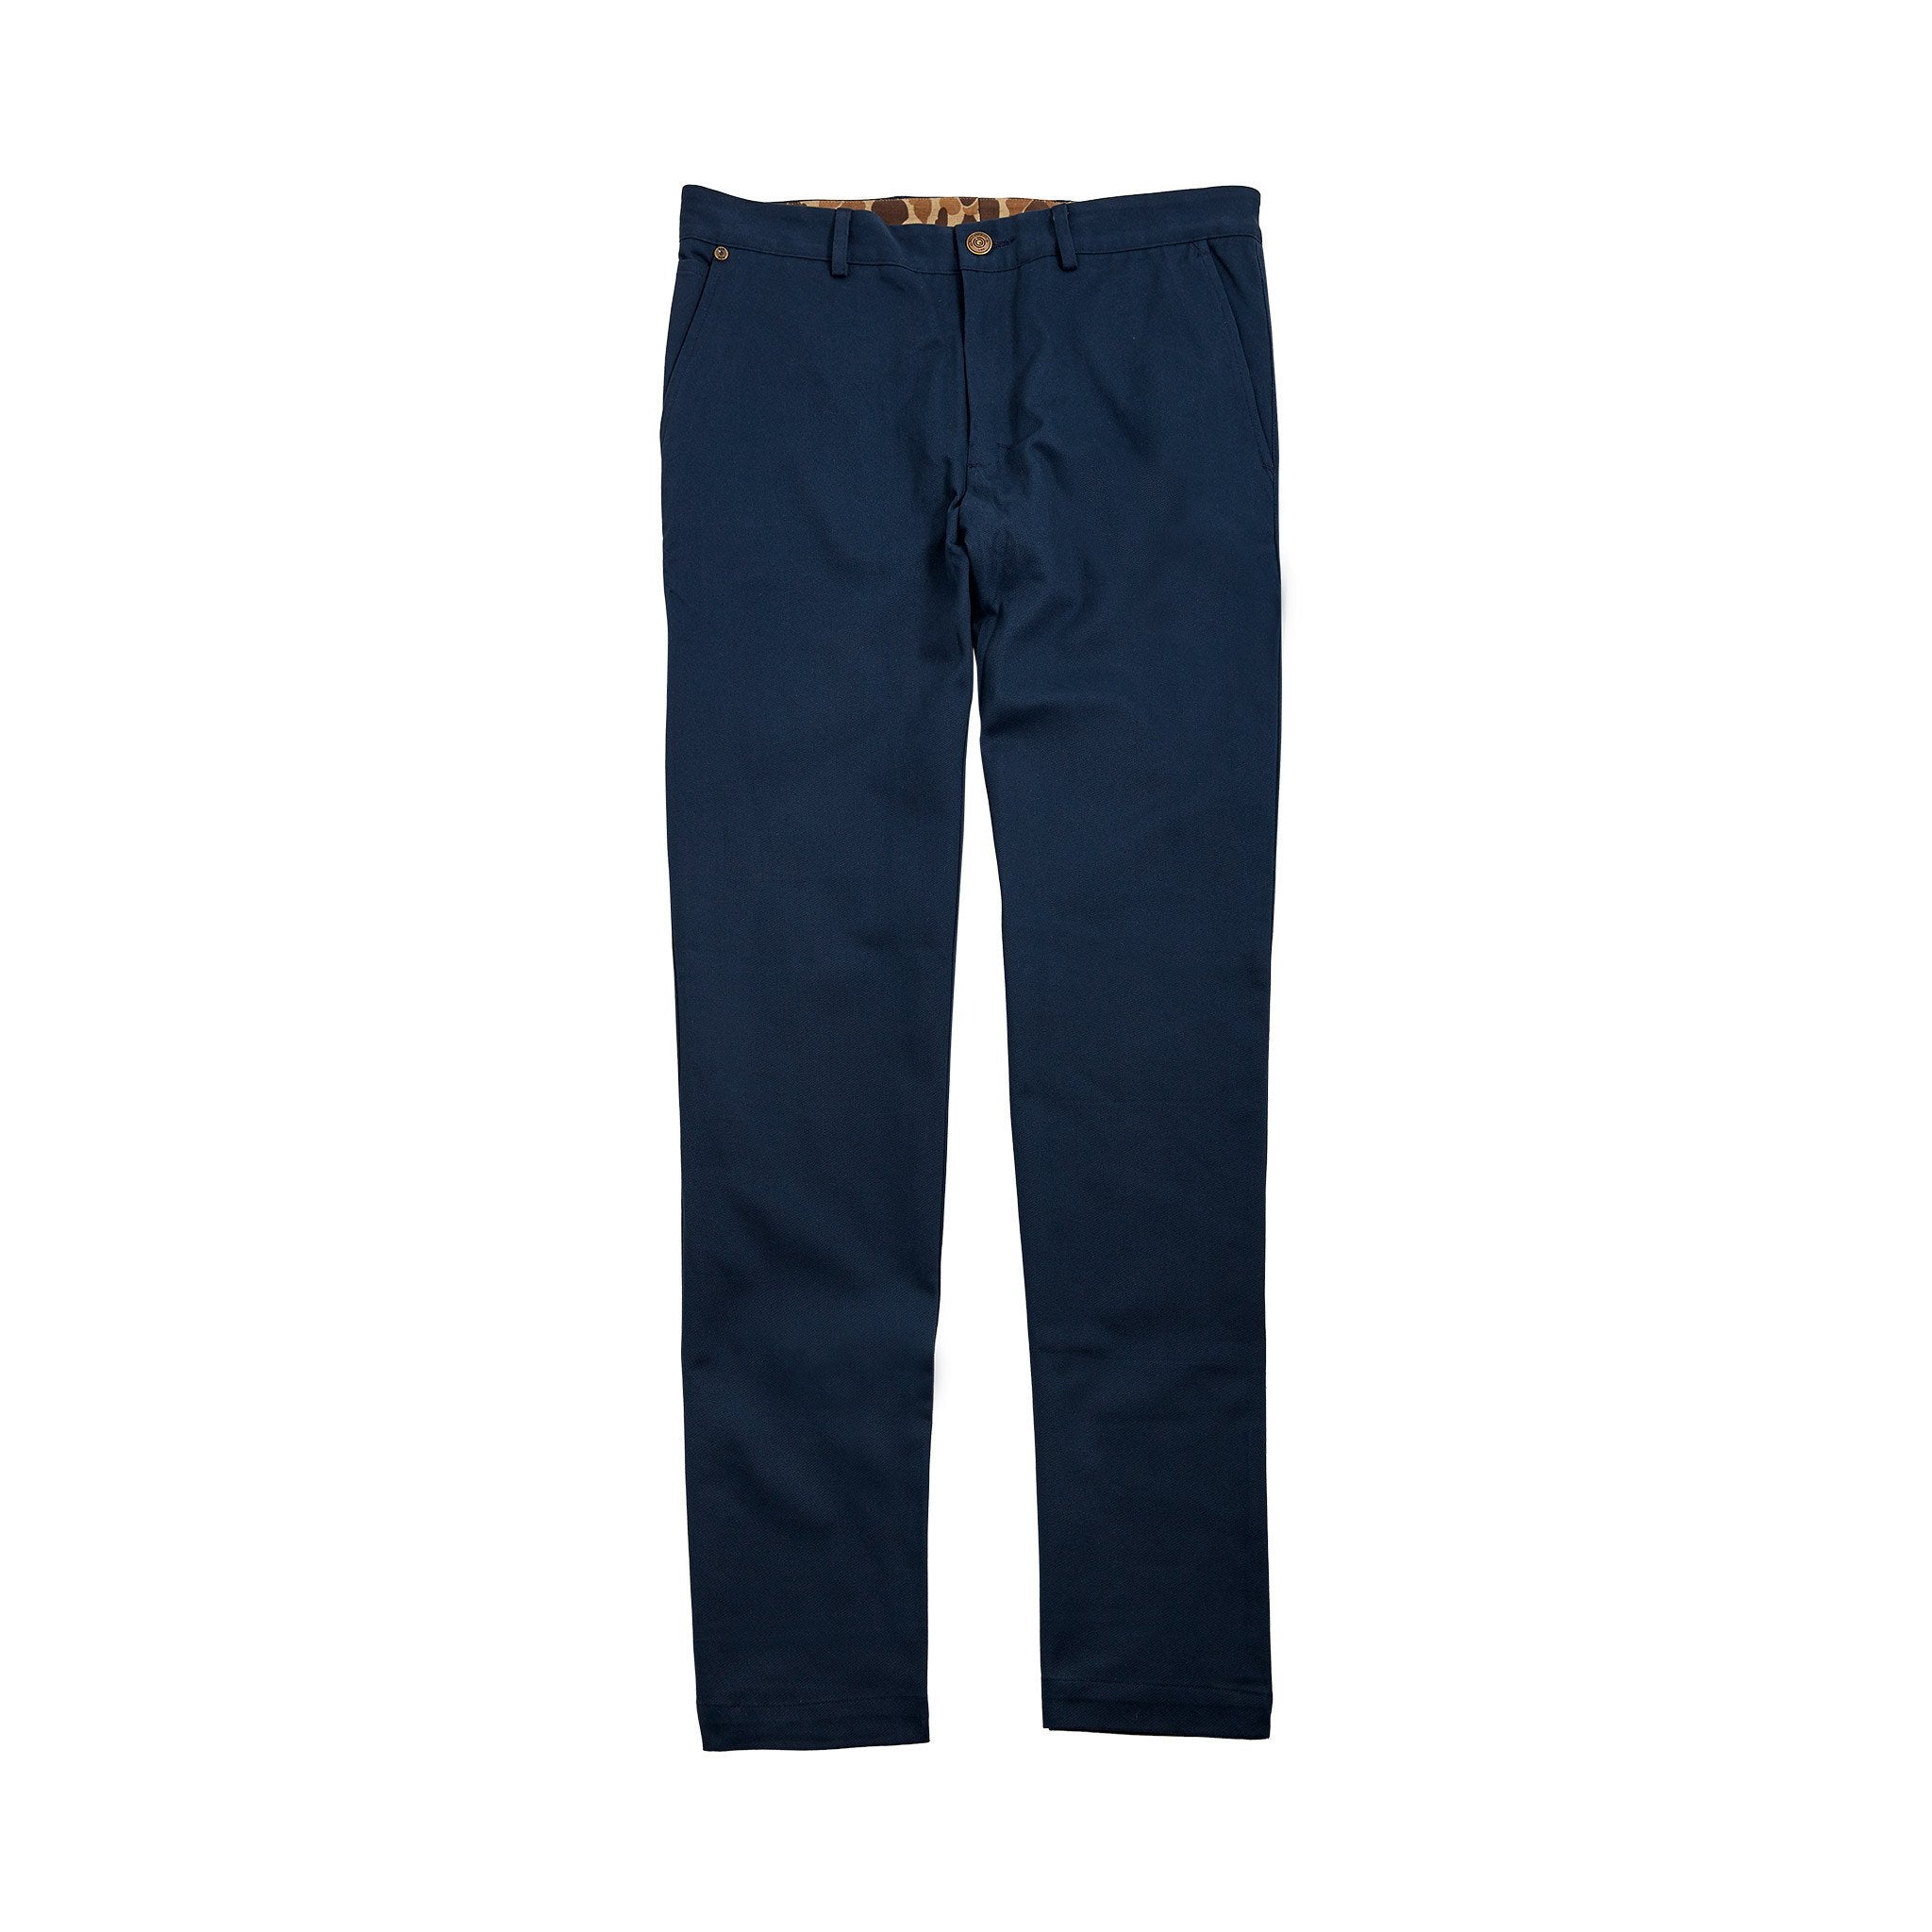 The 6 Point Pant, Navy